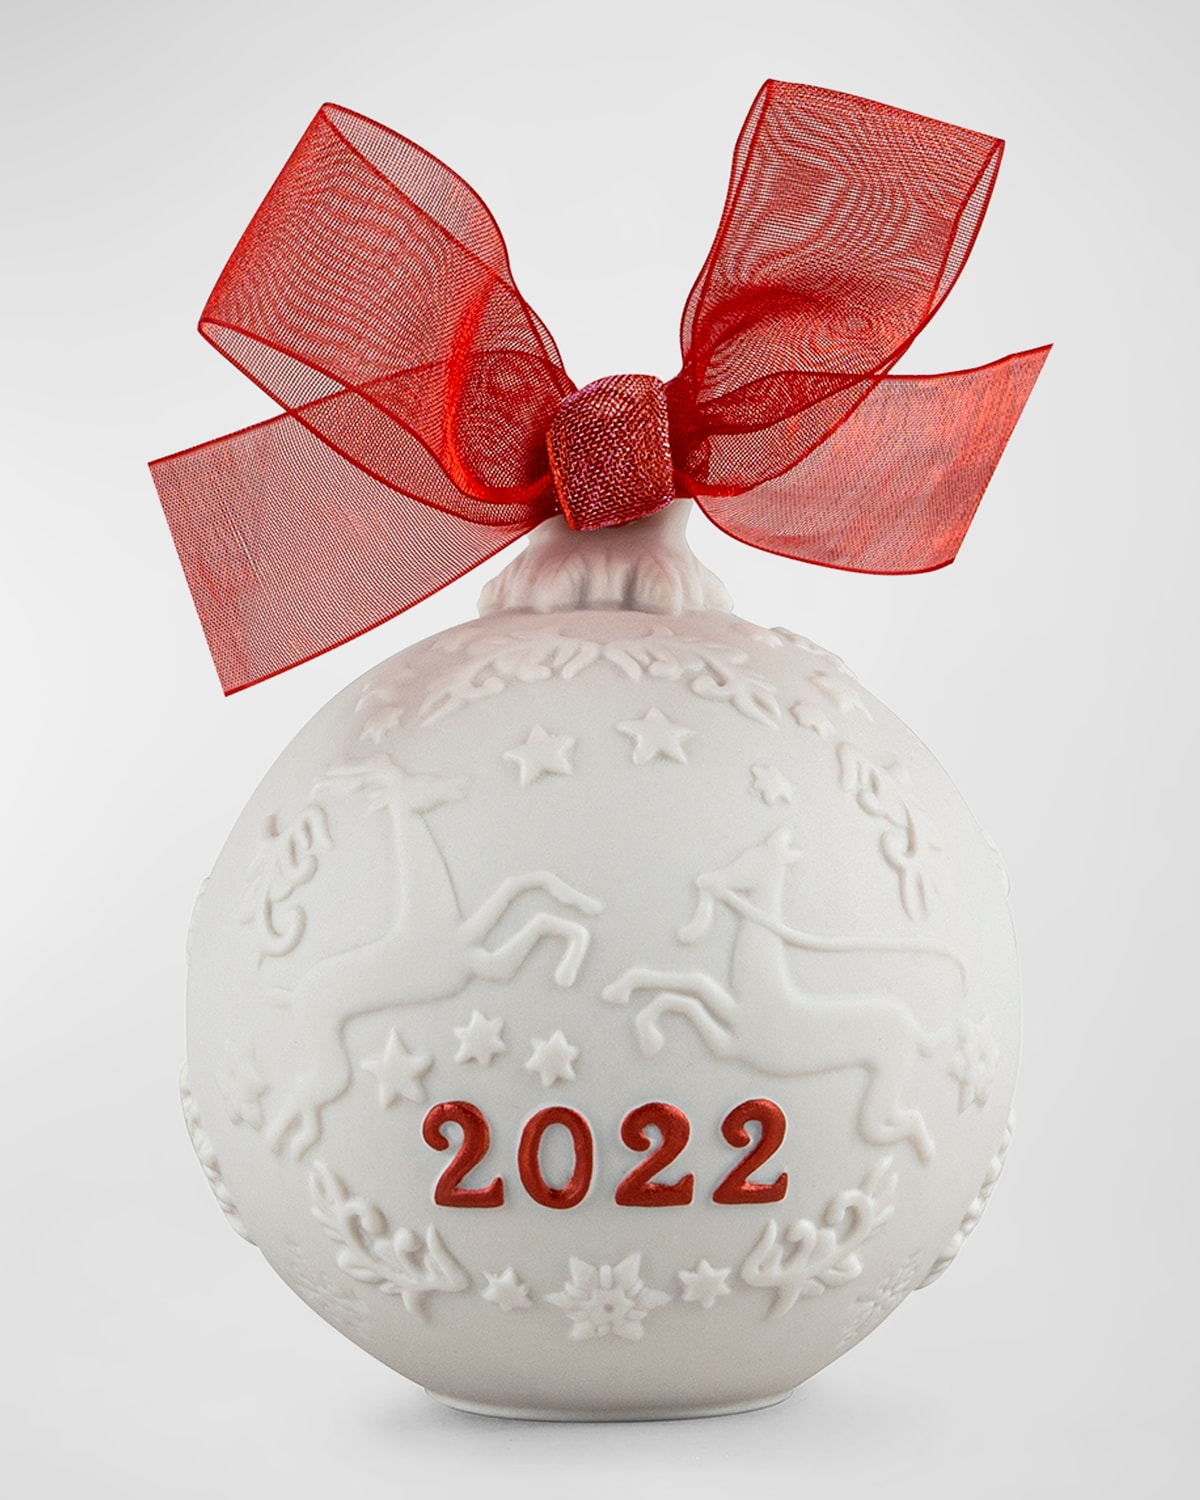 2022 Christmas Ball Ornament (Re-Deco Red)